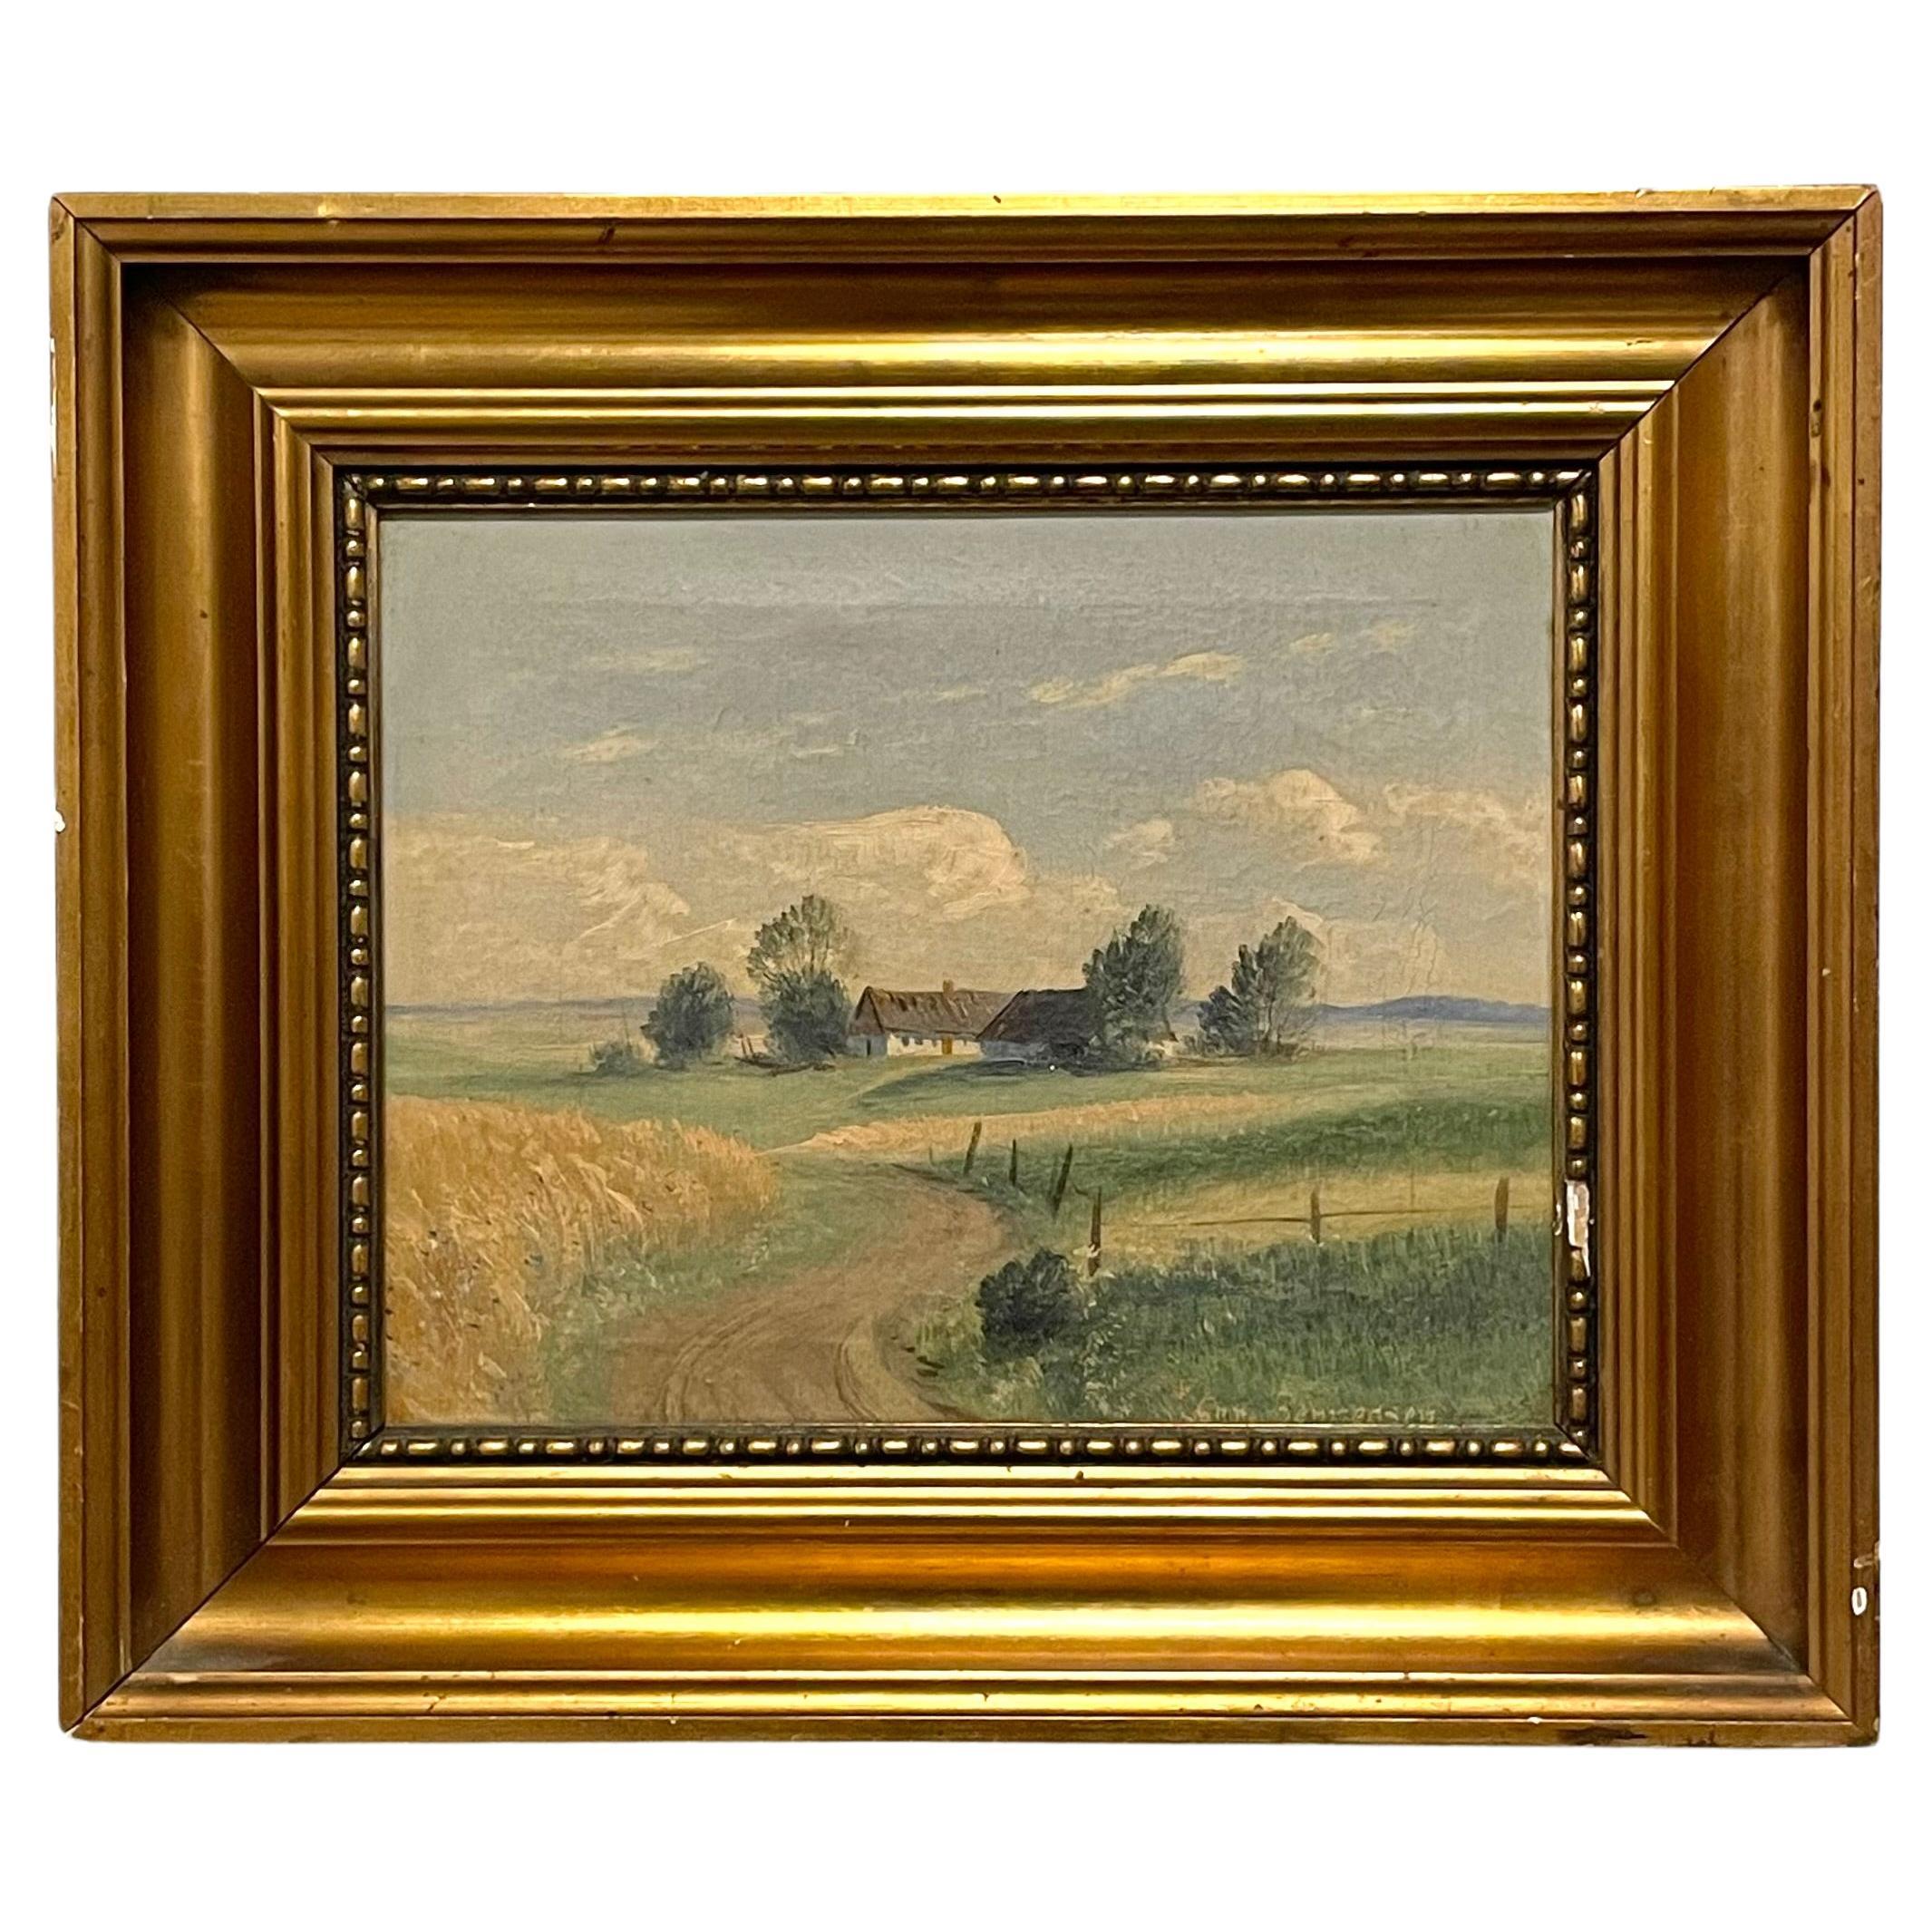 Early 20th century Danish vintage painting by Christian Bennedsen (1893-1967)